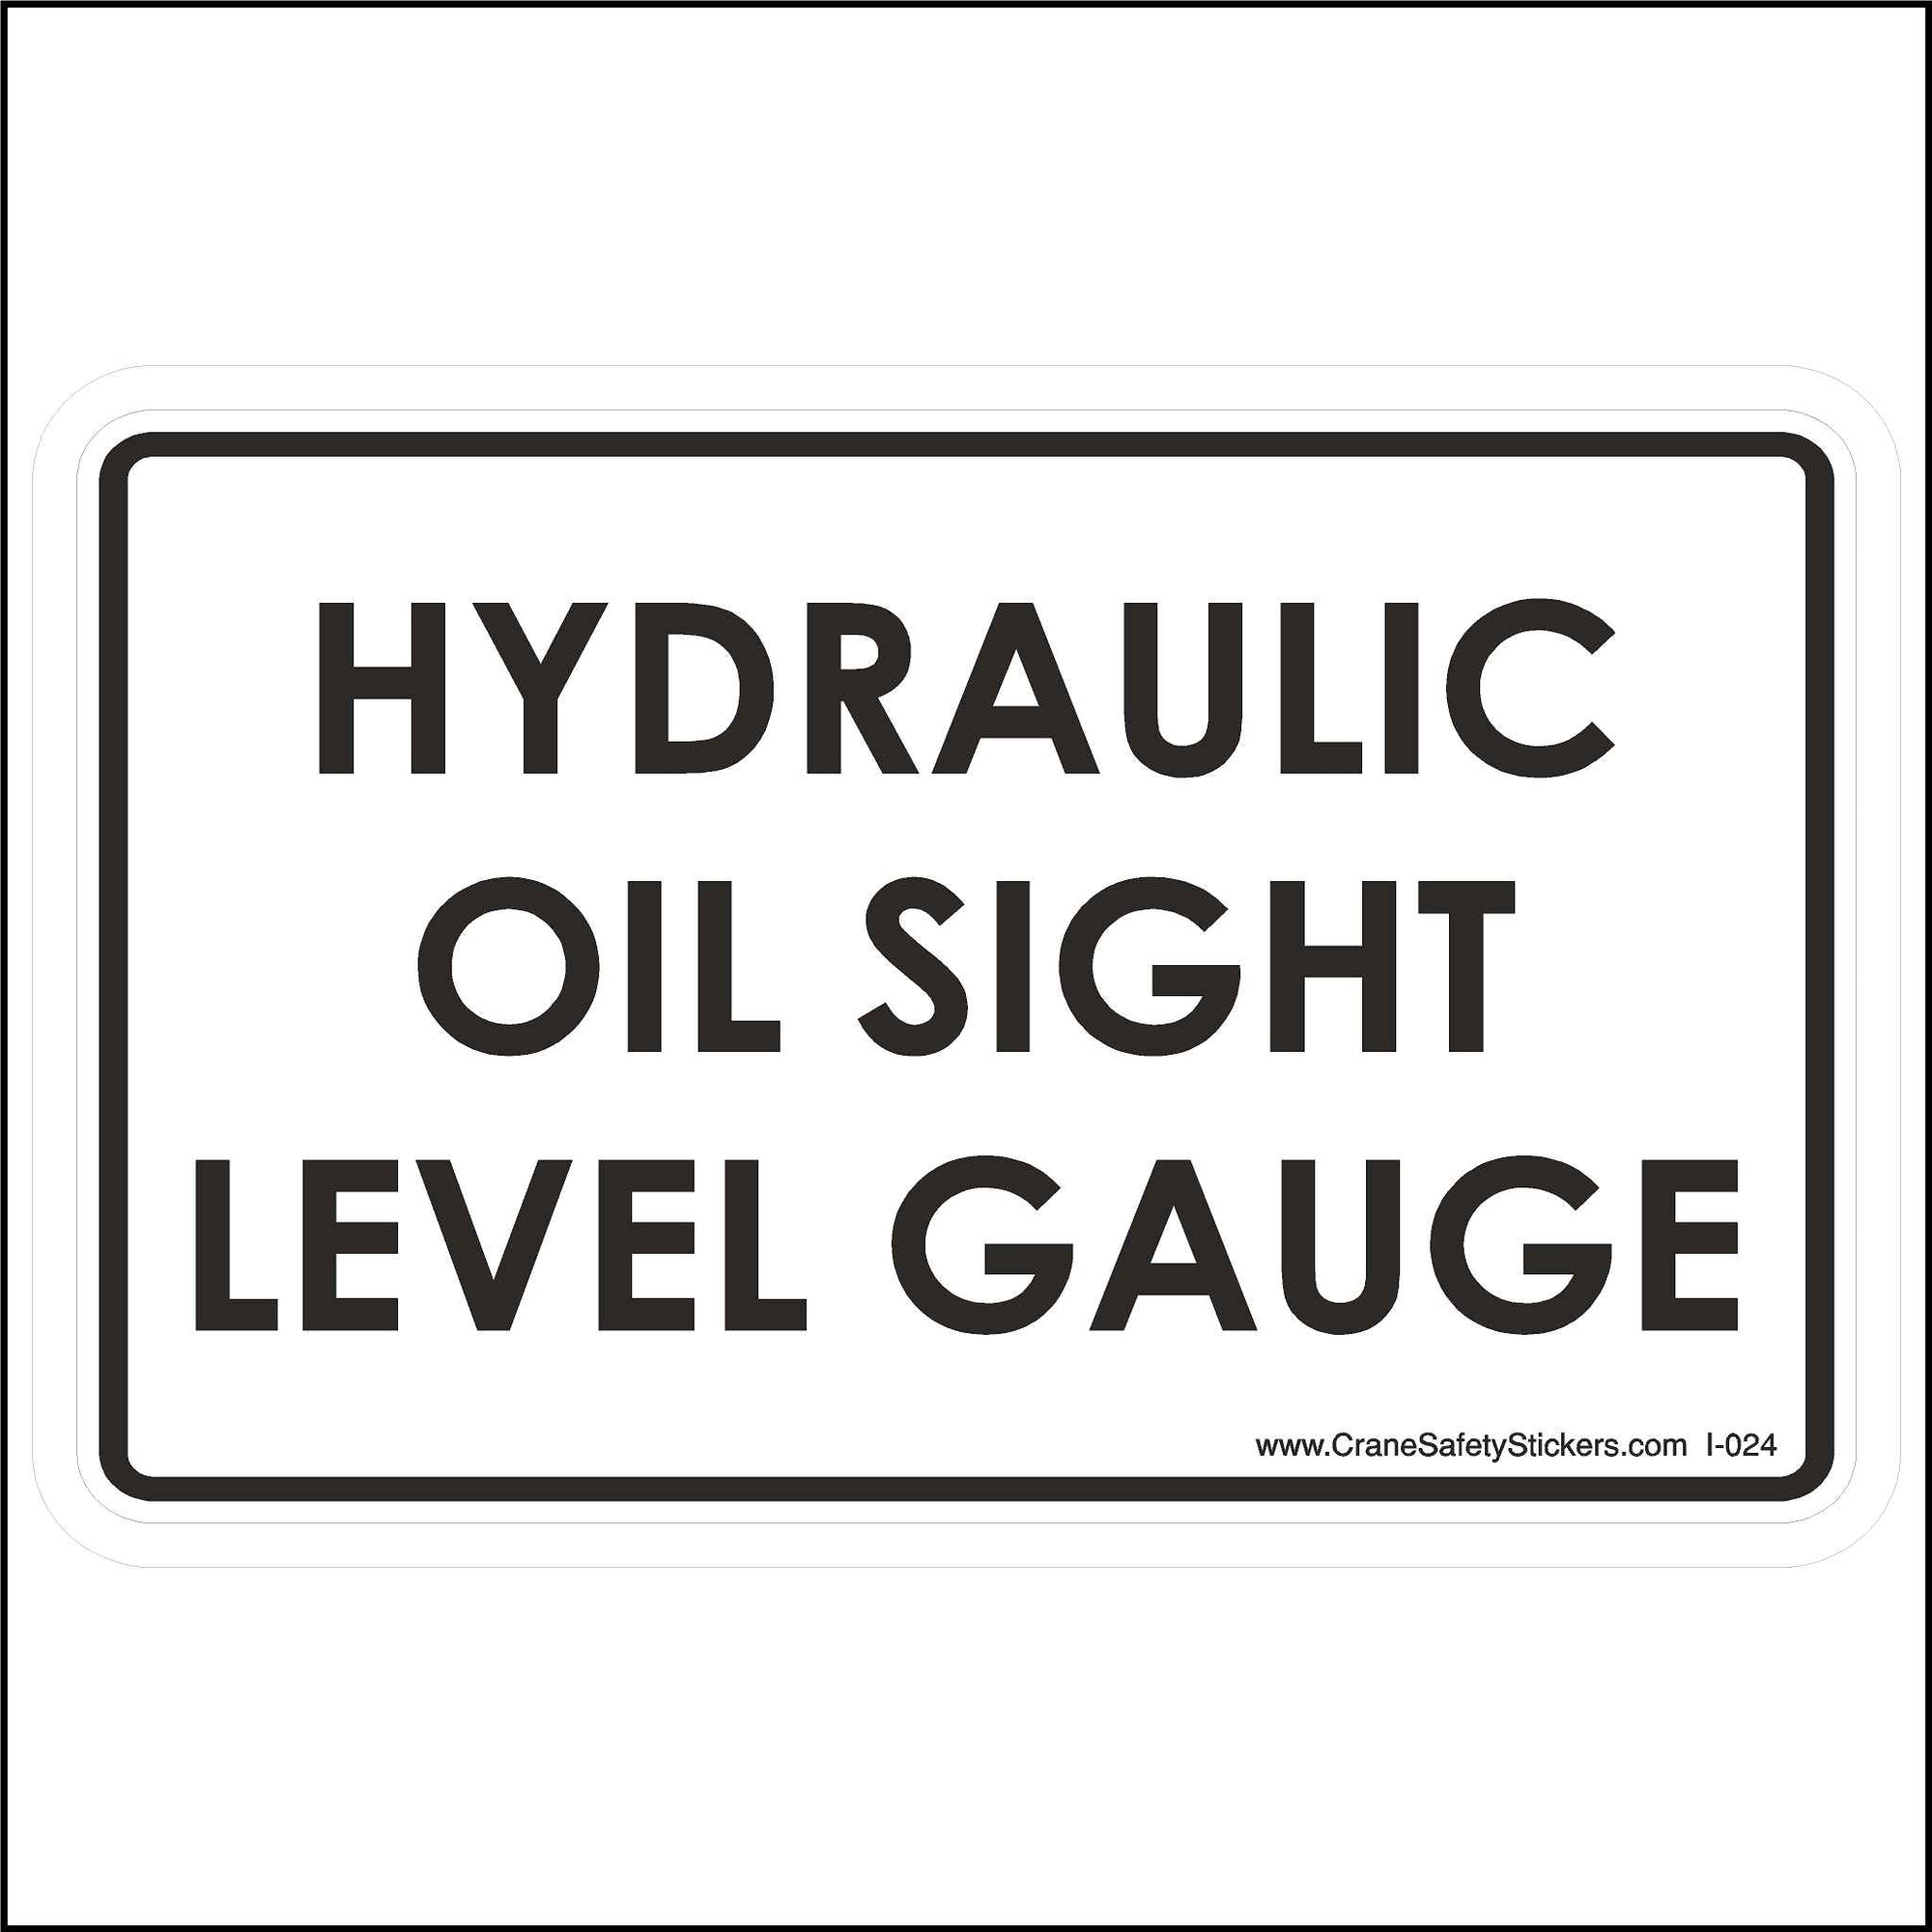 This Hydraulic Oil Sight Level Gauge Label is Printed With. Hydraulic Oil Sight Level Gauge. 